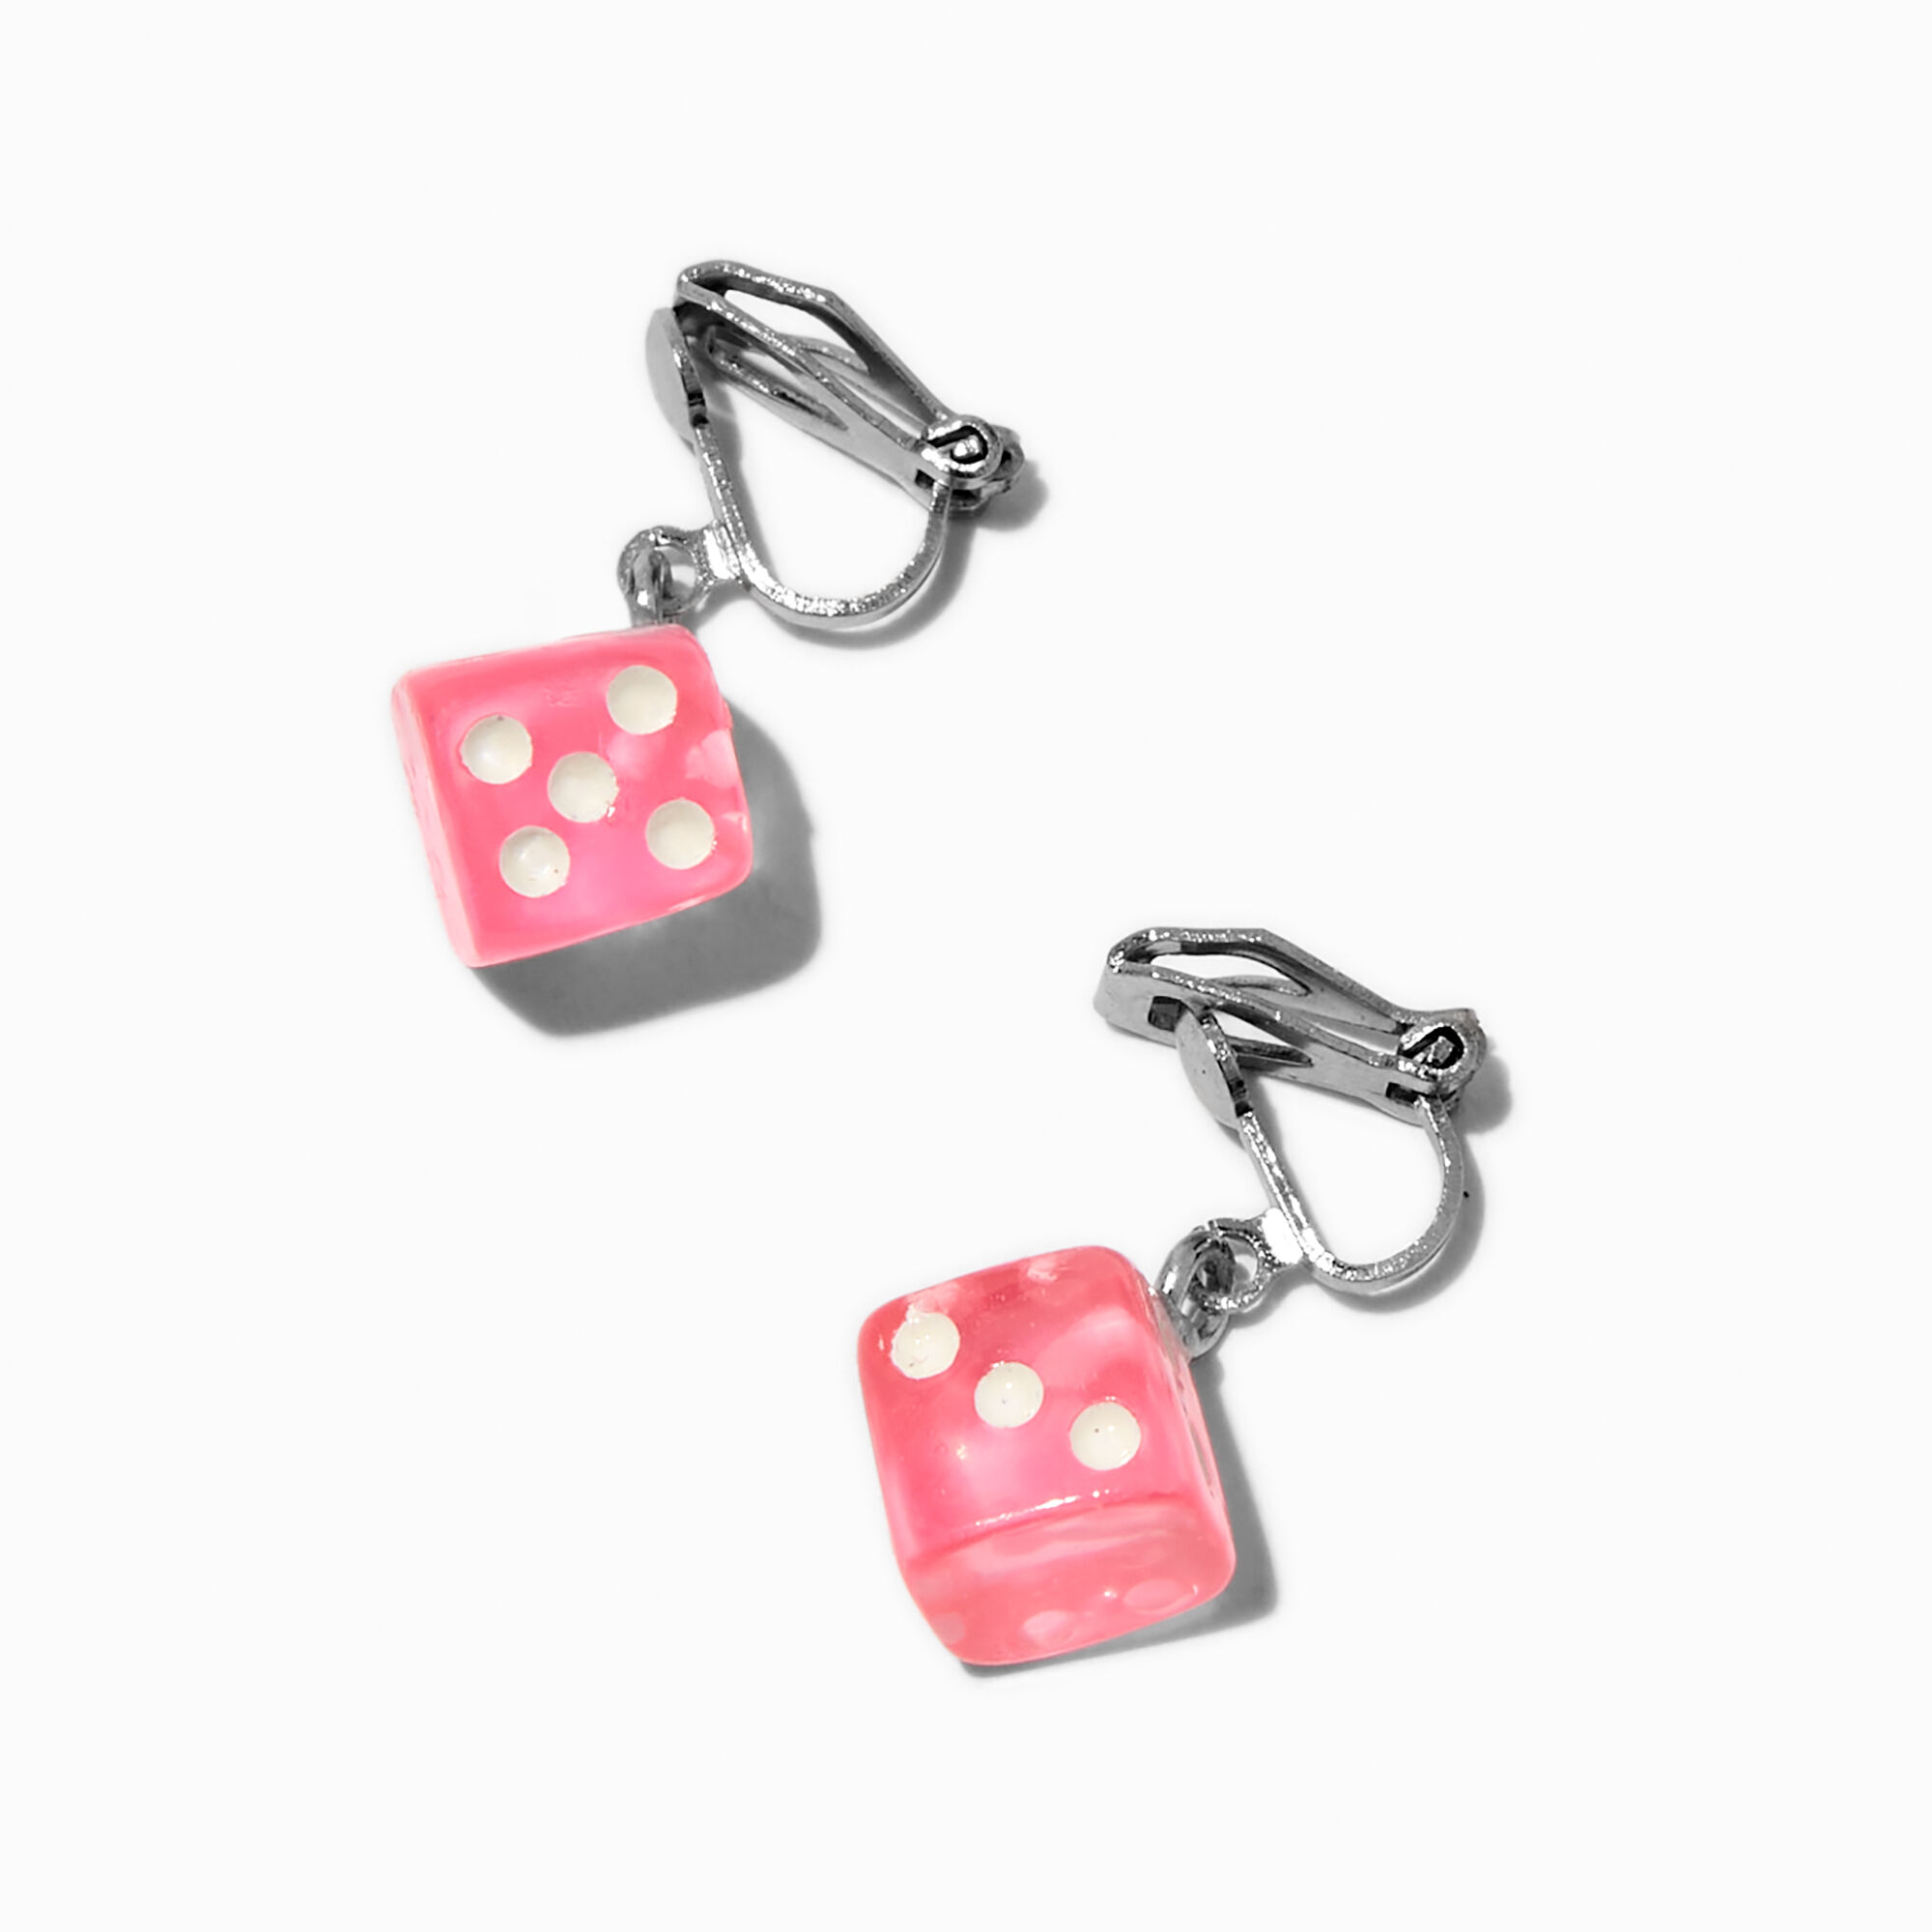 View Claires Dice 05 ClipOn Drop Earrings Pink information